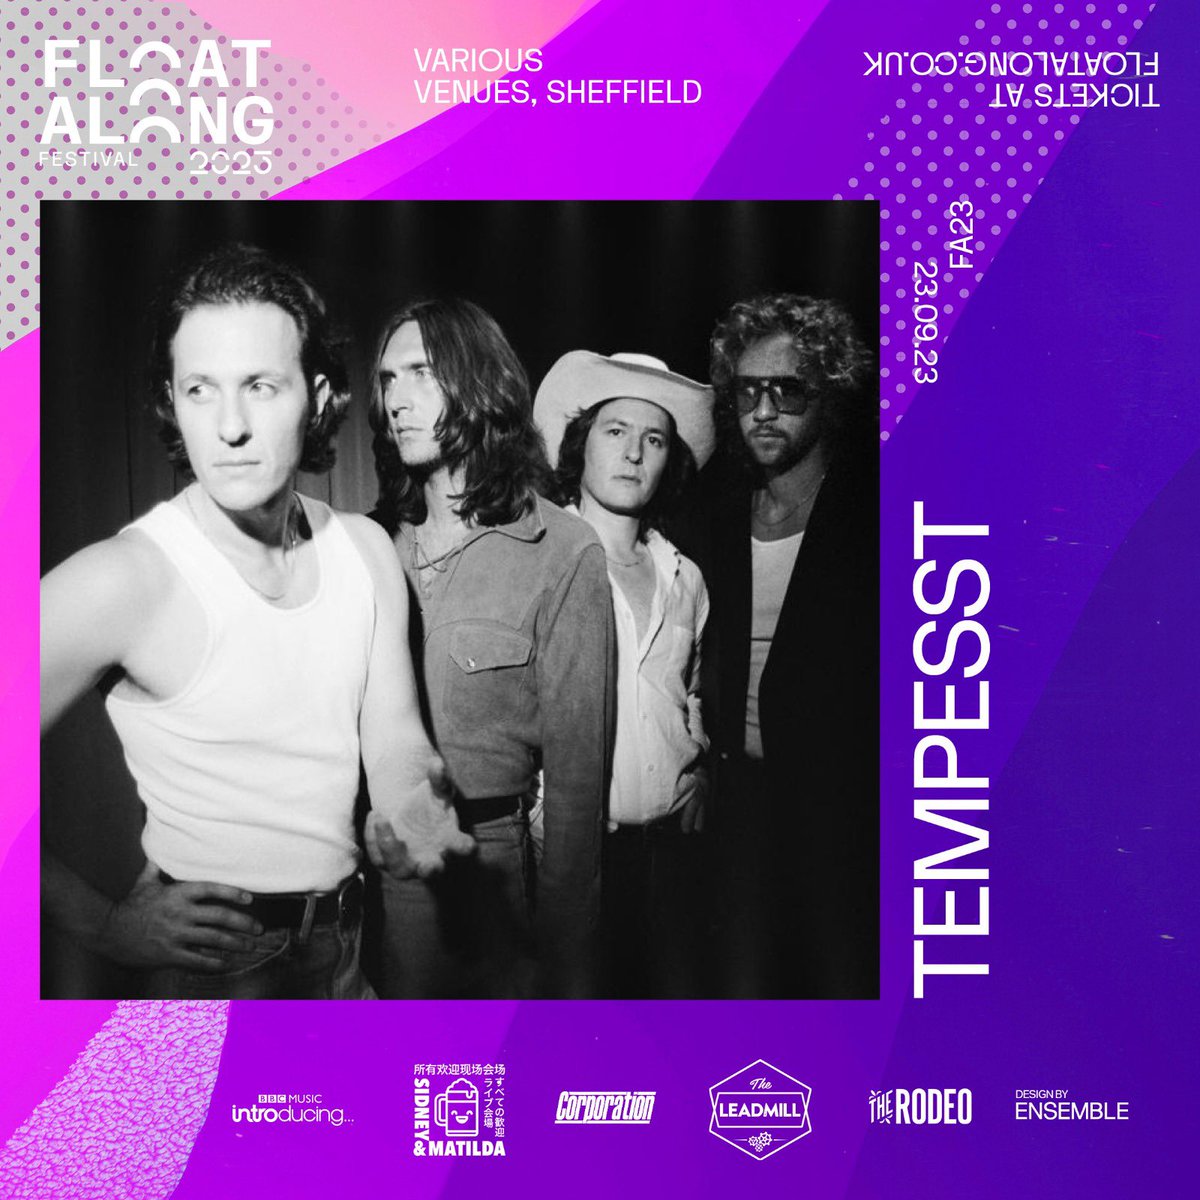 We’re delighted to have @TempesstBand bring there psych infused rock to Float Along this Sept Their two albums have been a constant presence in F.A towers, with their latest record “Prisoner Of Desire” having been released back in March.